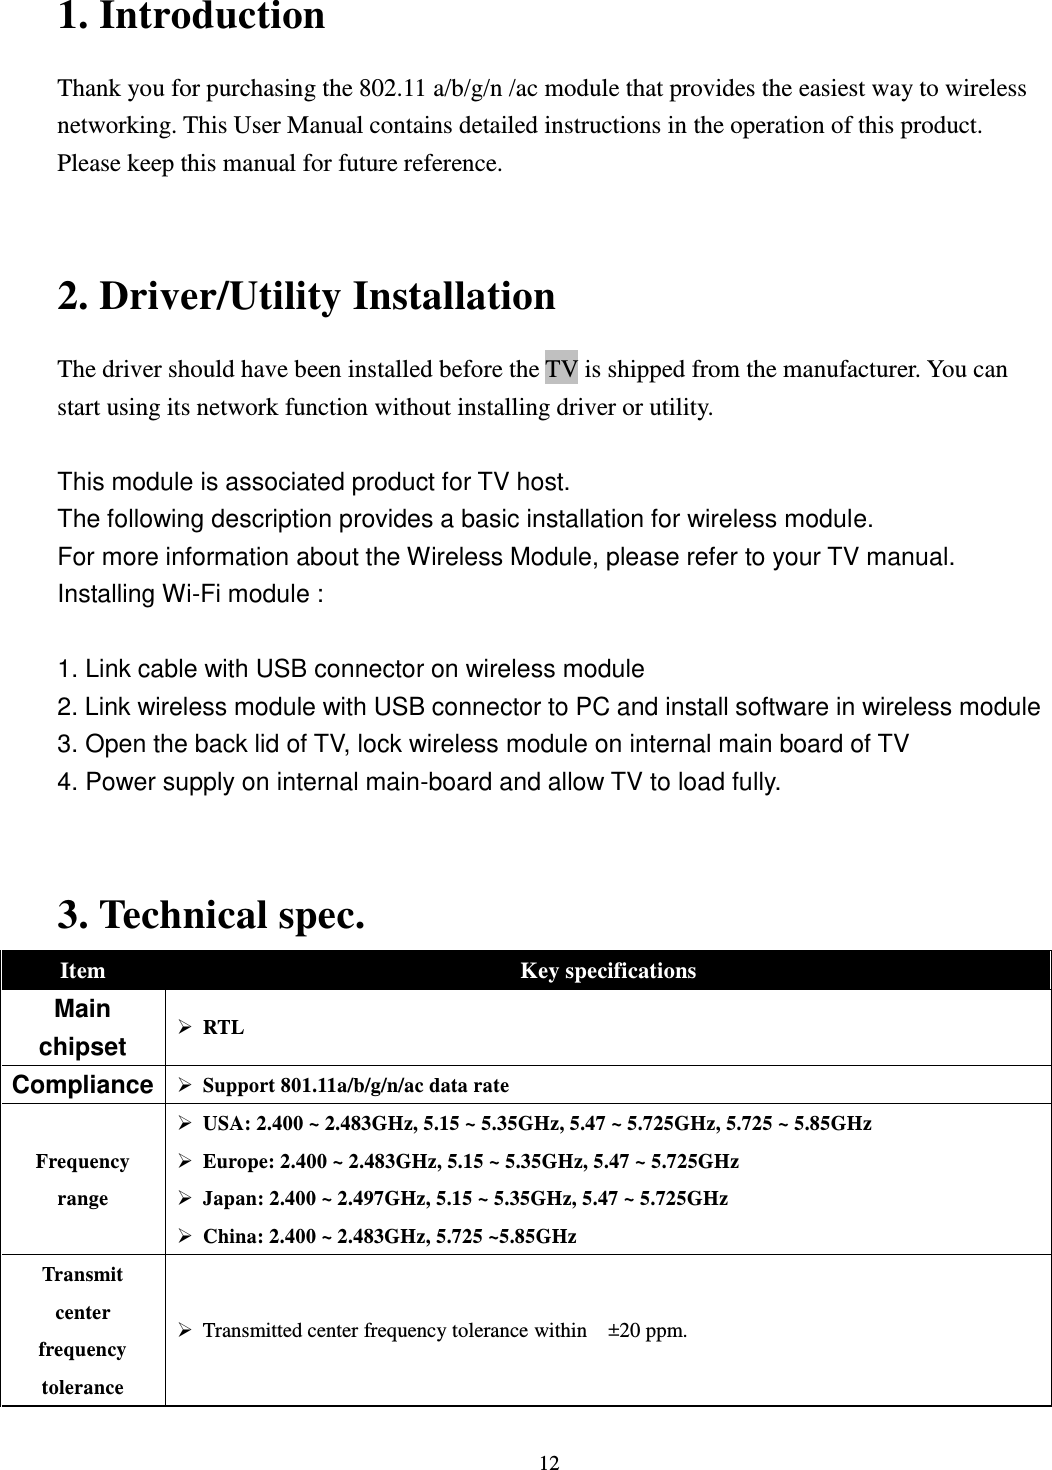  12 1. Introduction Thank you for purchasing the 802.11 a/b/g/n /ac module that provides the easiest way to wireless networking. This User Manual contains detailed instructions in the operation of this product. Please keep this manual for future reference.     2. Driver/Utility Installation   The driver should have been installed before the TV is shipped from the manufacturer. You can start using its network function without installing driver or utility.  This module is associated product for TV host. The following description provides a basic installation for wireless module. For more information about the Wireless Module, please refer to your TV manual. Installing Wi-Fi module :   1. Link cable with USB connector on wireless module 2. Link wireless module with USB connector to PC and install software in wireless module 3. Open the back lid of TV, lock wireless module on internal main board of TV 4. Power supply on internal main-board and allow TV to load fully.  3. Technical spec.   Item Key specifications Main chipset  RTL Compliance  Support 801.11a/b/g/n/ac data rate Frequency range  USA: 2.400 ~ 2.483GHz, 5.15 ~ 5.35GHz, 5.47 ~ 5.725GHz, 5.725 ~ 5.85GHz  Europe: 2.400 ~ 2.483GHz, 5.15 ~ 5.35GHz, 5.47 ~ 5.725GHz  Japan: 2.400 ~ 2.497GHz, 5.15 ~ 5.35GHz, 5.47 ~ 5.725GHz  China: 2.400 ~ 2.483GHz, 5.725 ~5.85GHz Transmit center frequency tolerance  Transmitted center frequency tolerance within    ±20 ppm. 